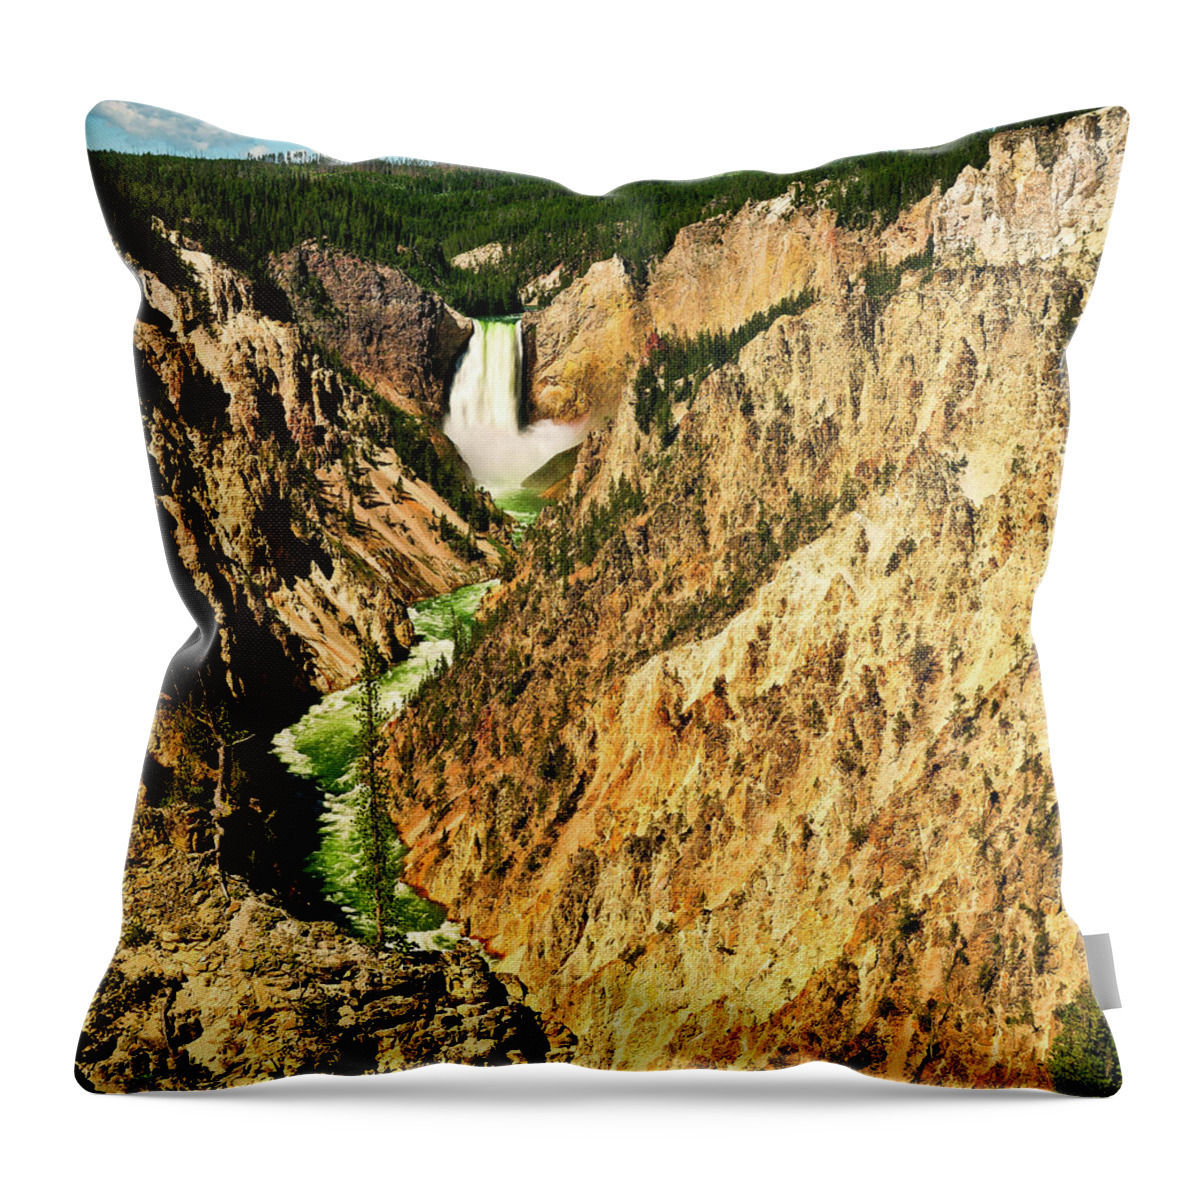 Yellowstone National Park Throw Pillow featuring the photograph Yellowstone Grand Canyon by Greg Norrell